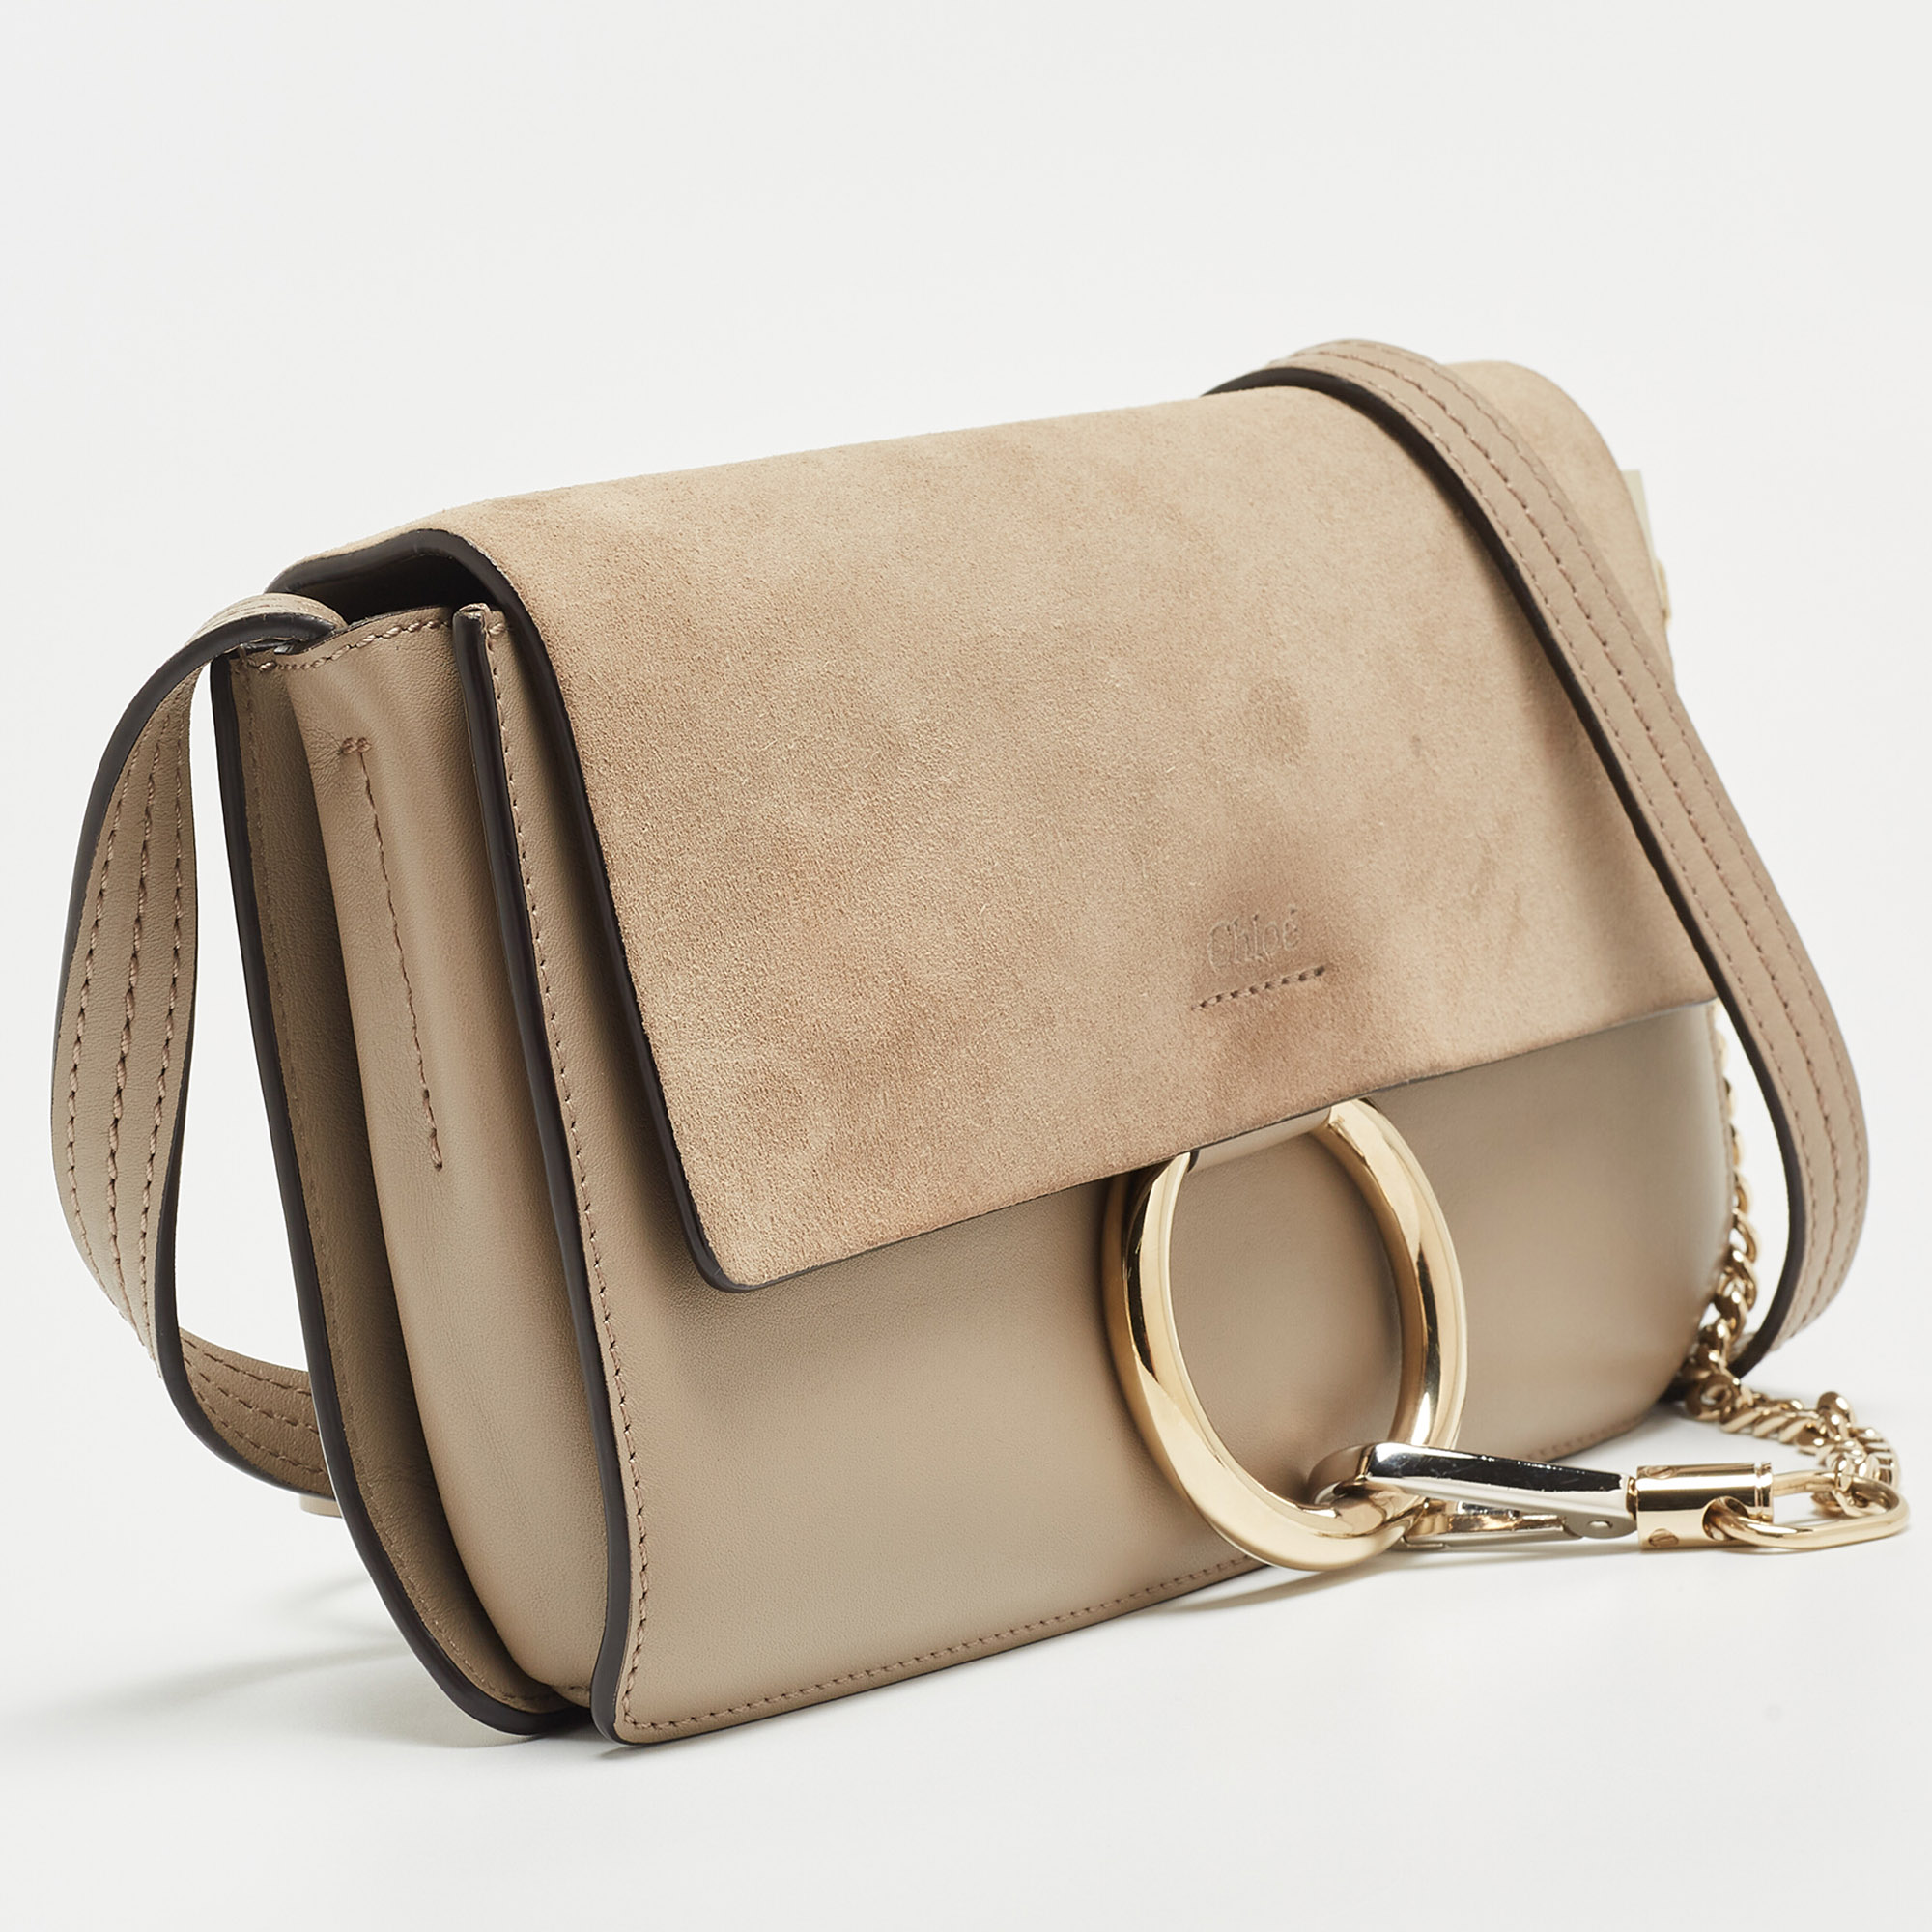 Chloe Taupe Leather And Suede Small Faye Shoulder Bag